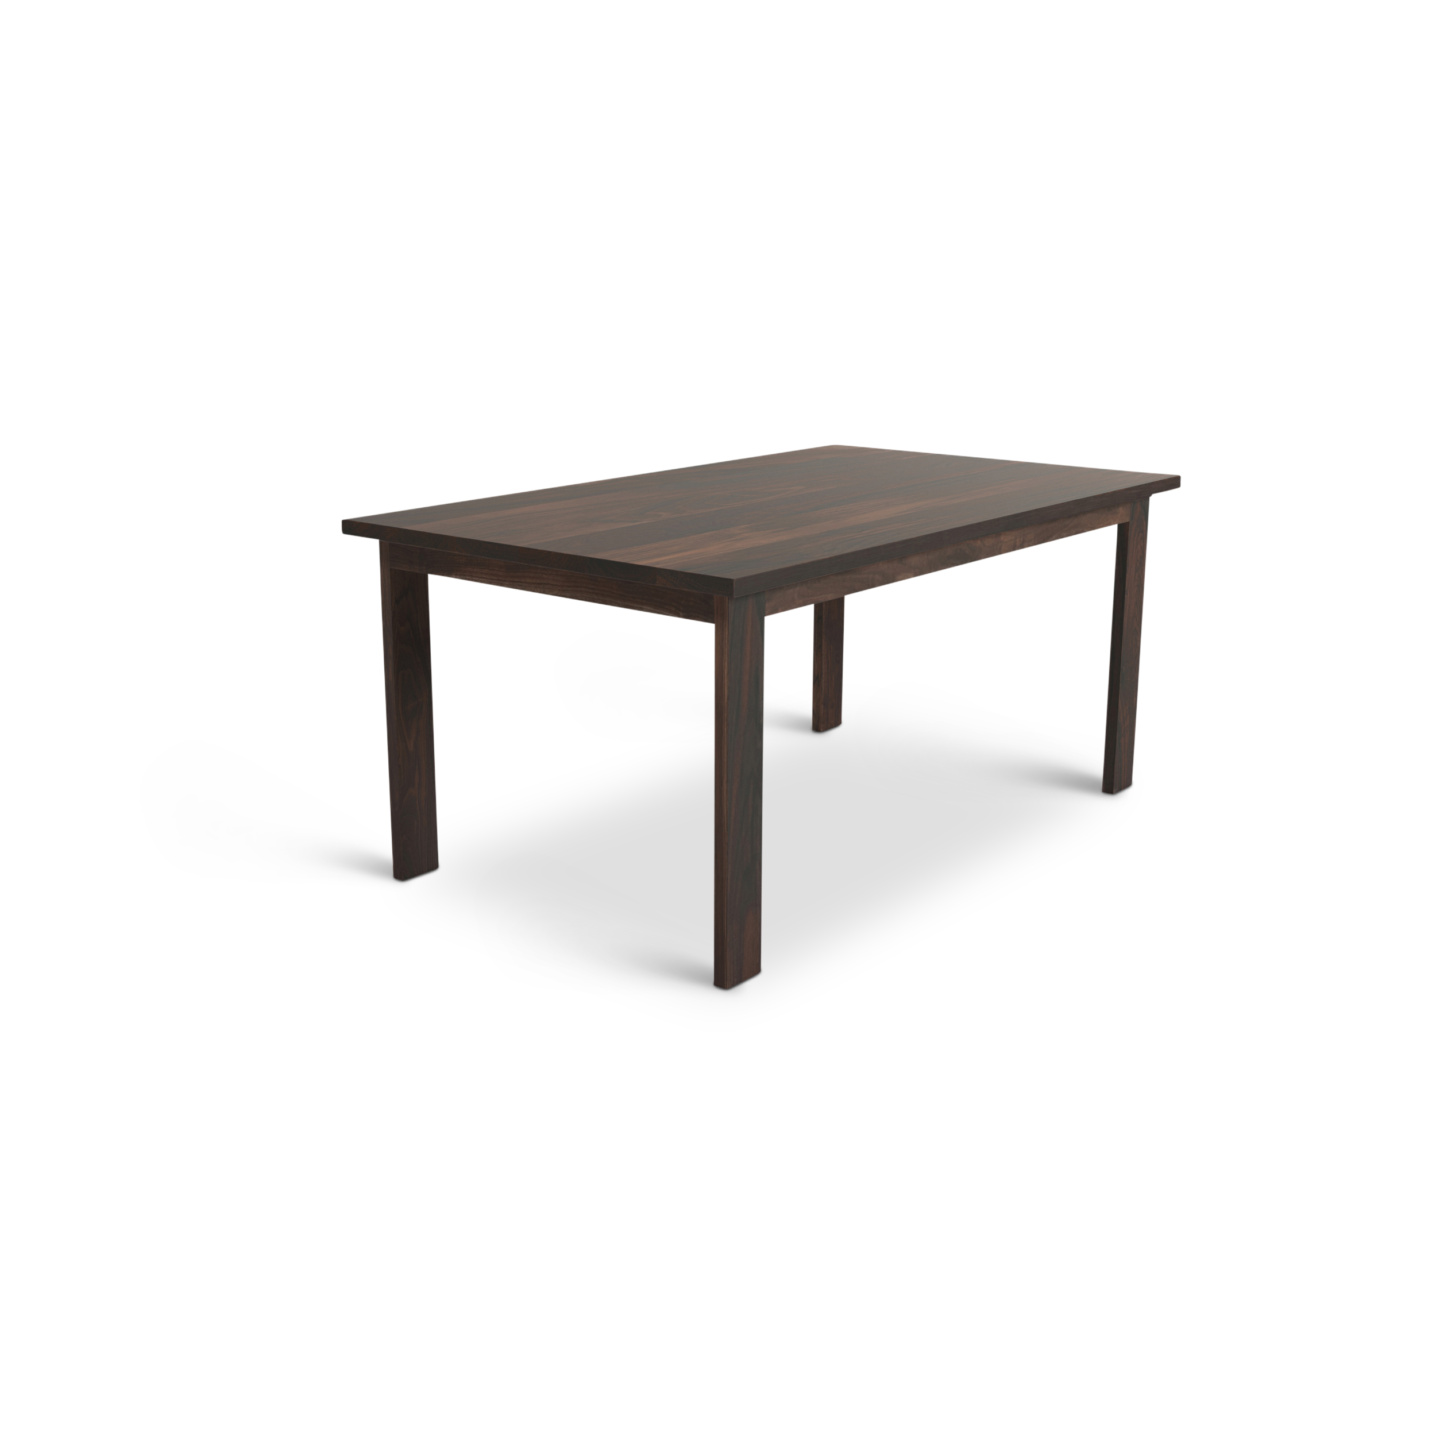 Modern Solid Walnut Table with rectangular legs